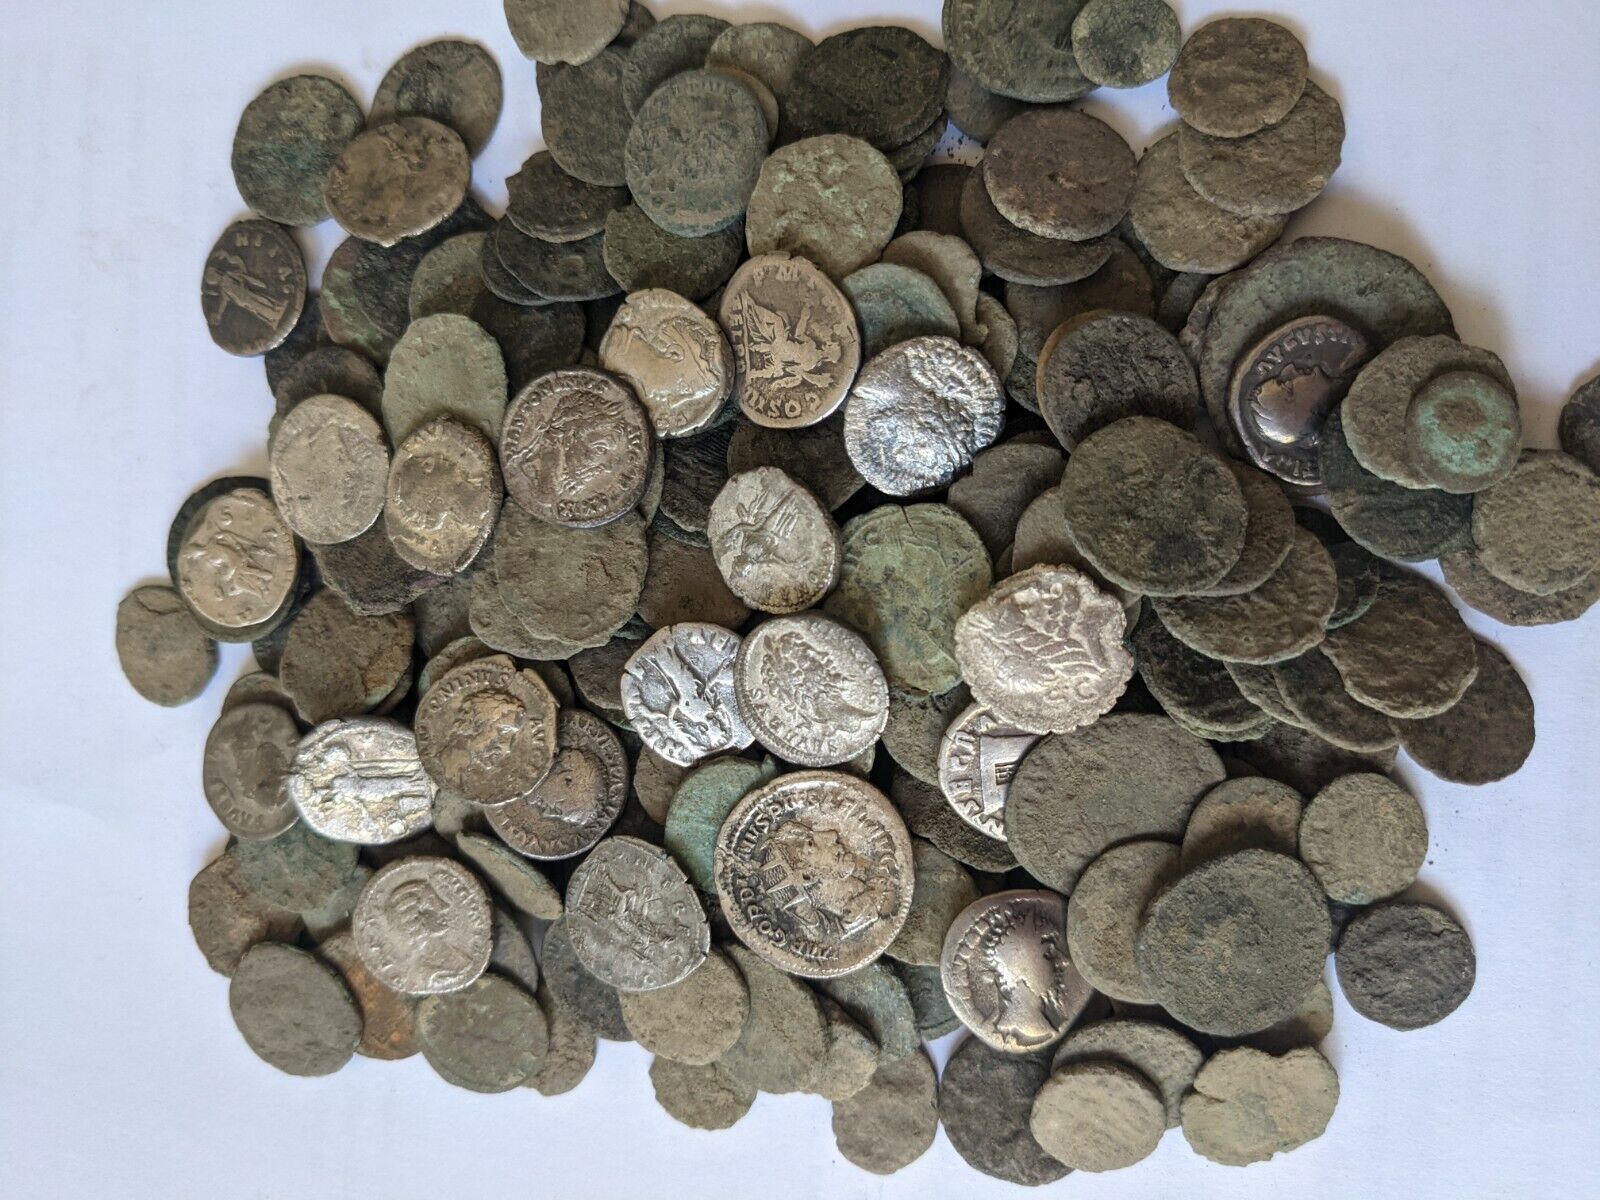 GENUINE UNCLEANED ANCIENT ROMAN COINS. GOOD QUALITY. Silver coins Included! - Premium Ancient Coins - Lot